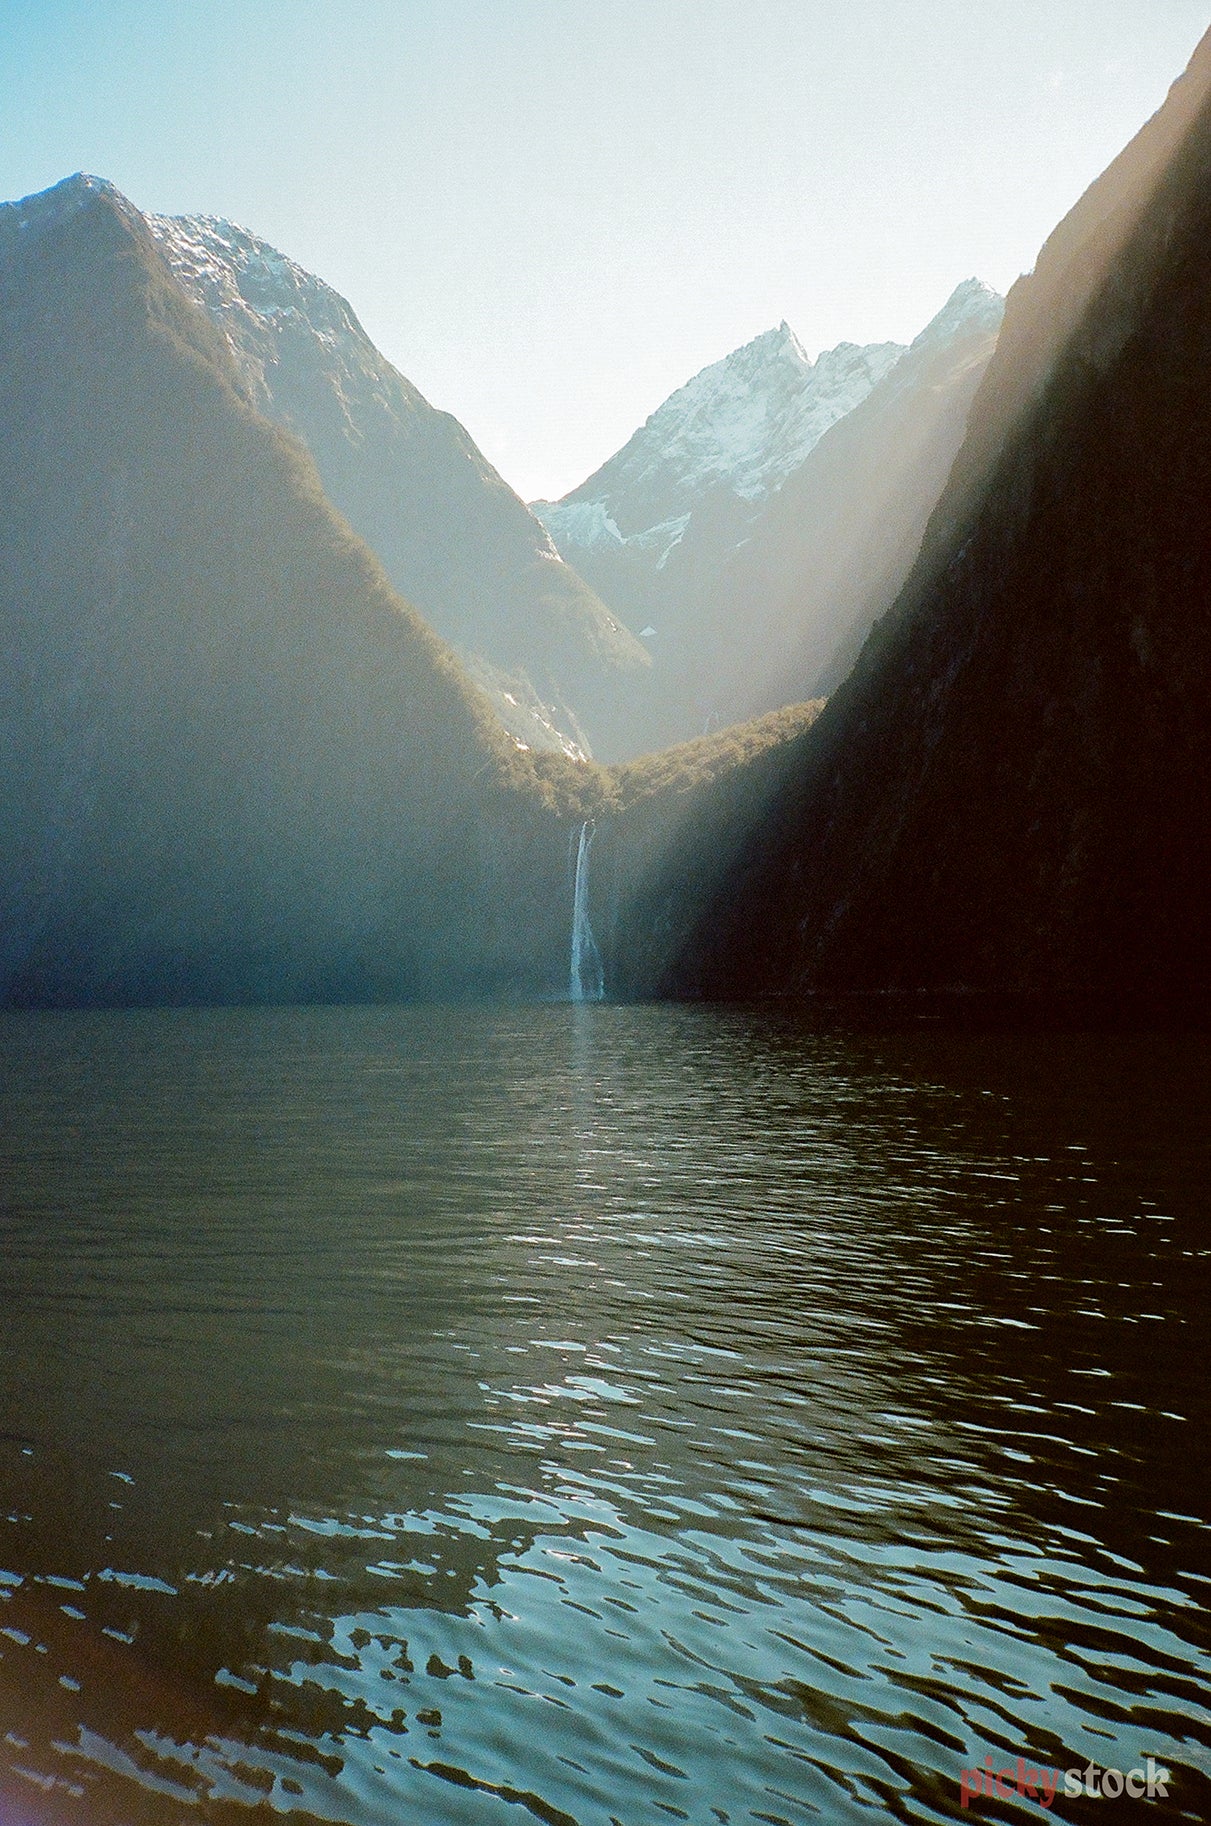 Looking out across the waters of the Milford Sound, towards a small waterfall at the foot of mountains. Sunlight filters in through the valley hitting the water. 